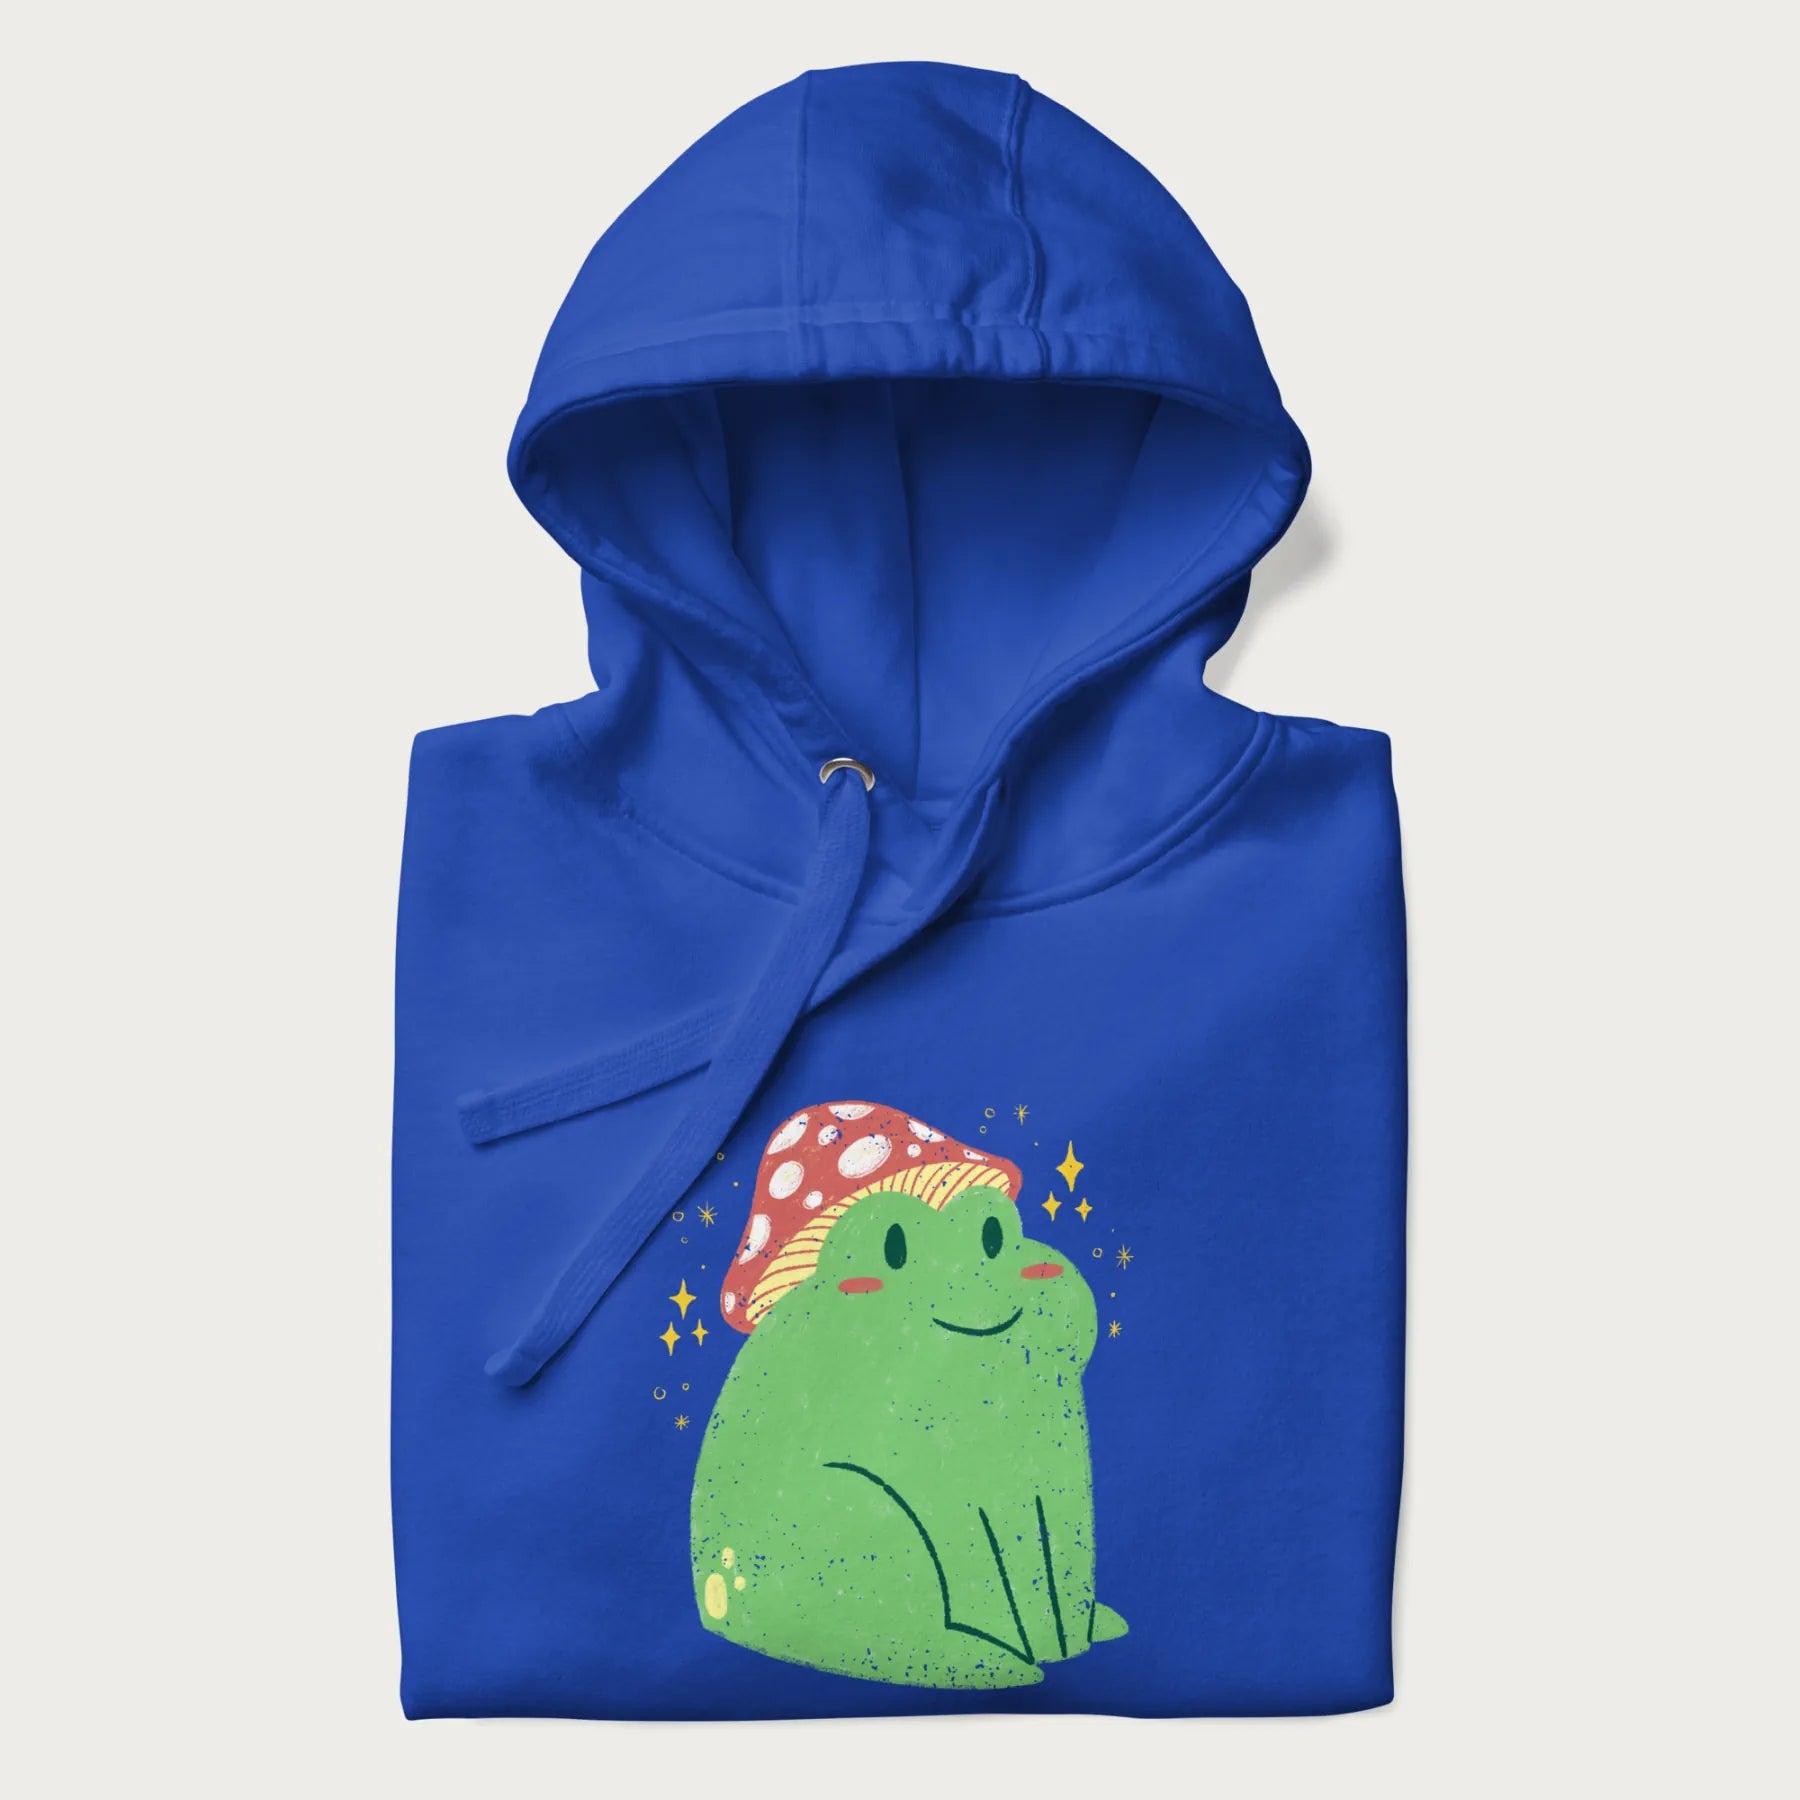 Folded royal blue hoodie with a graphic of a green frog wearing a mushroom cap surrounded by stars.